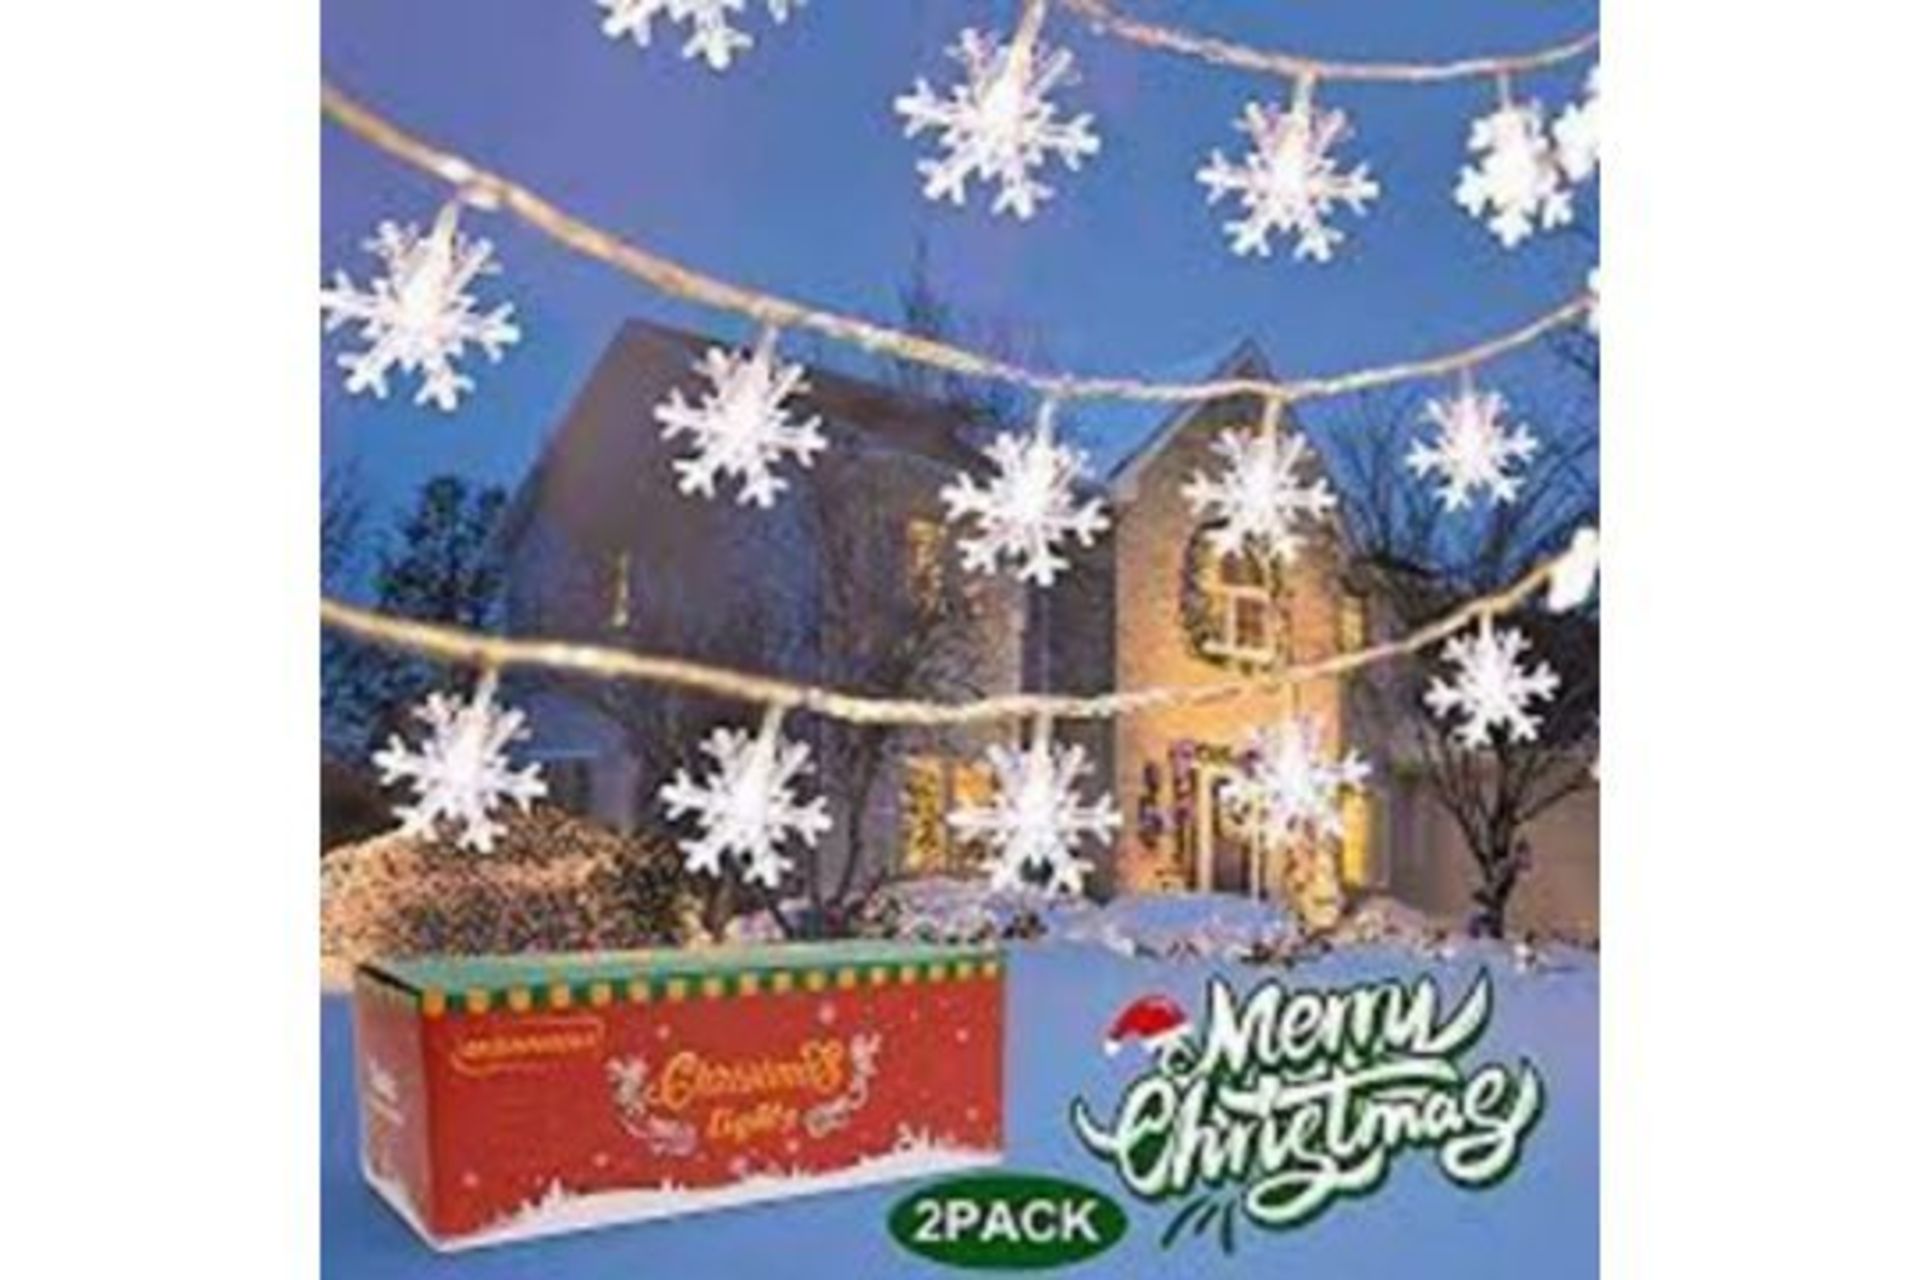 10 x NEW BOXED PACKS OF 2 BANNILU 80LED 40ft Snowflake String Lights Battery Operated Waterproof